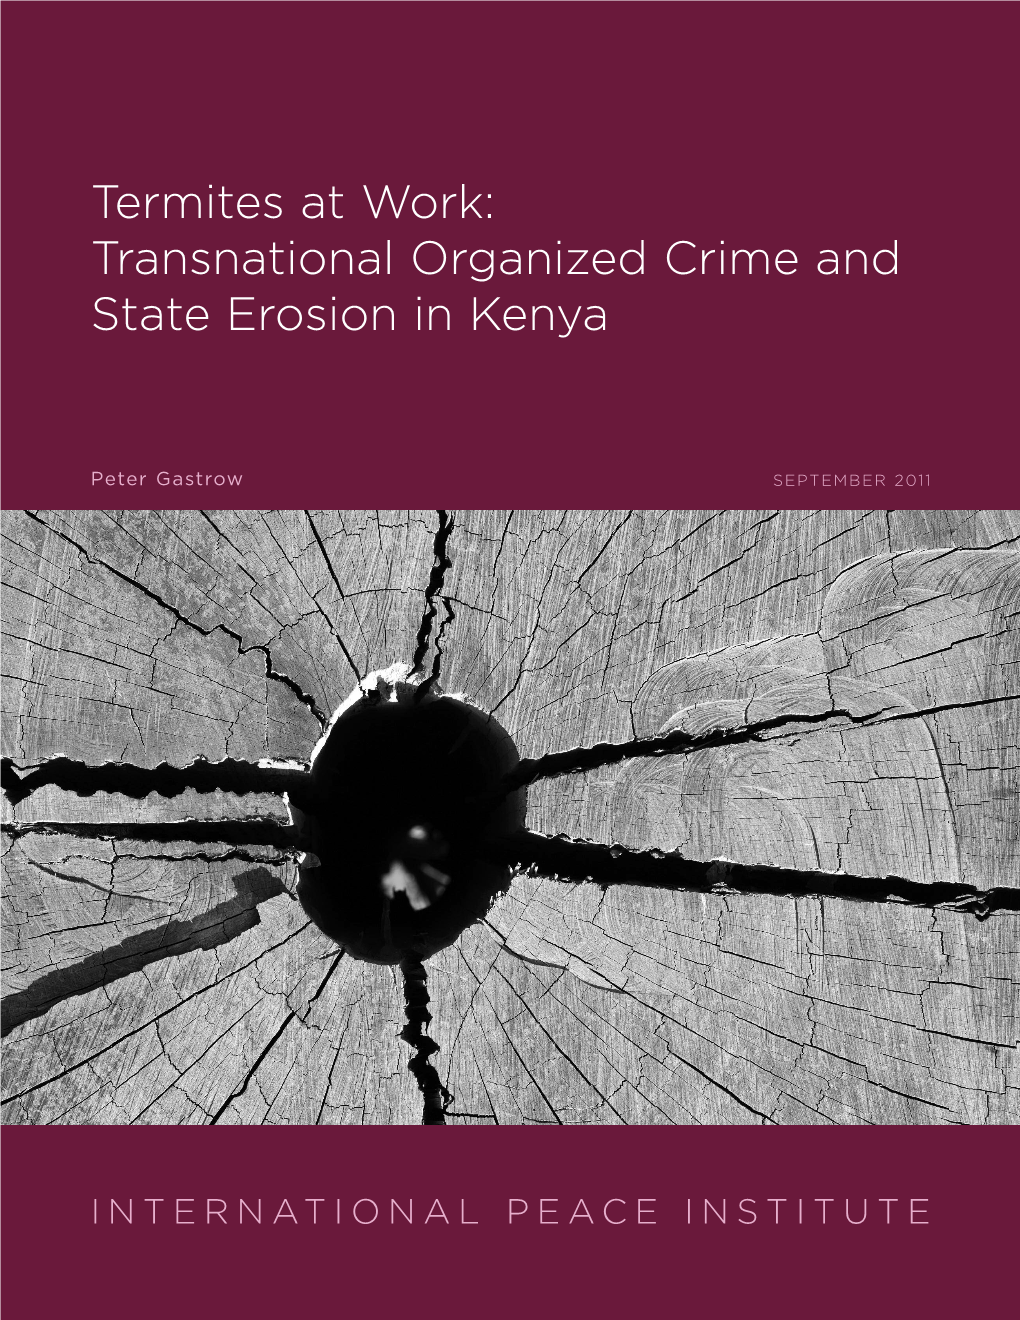 Transnational Organized Crime and State Erosion in Kenya